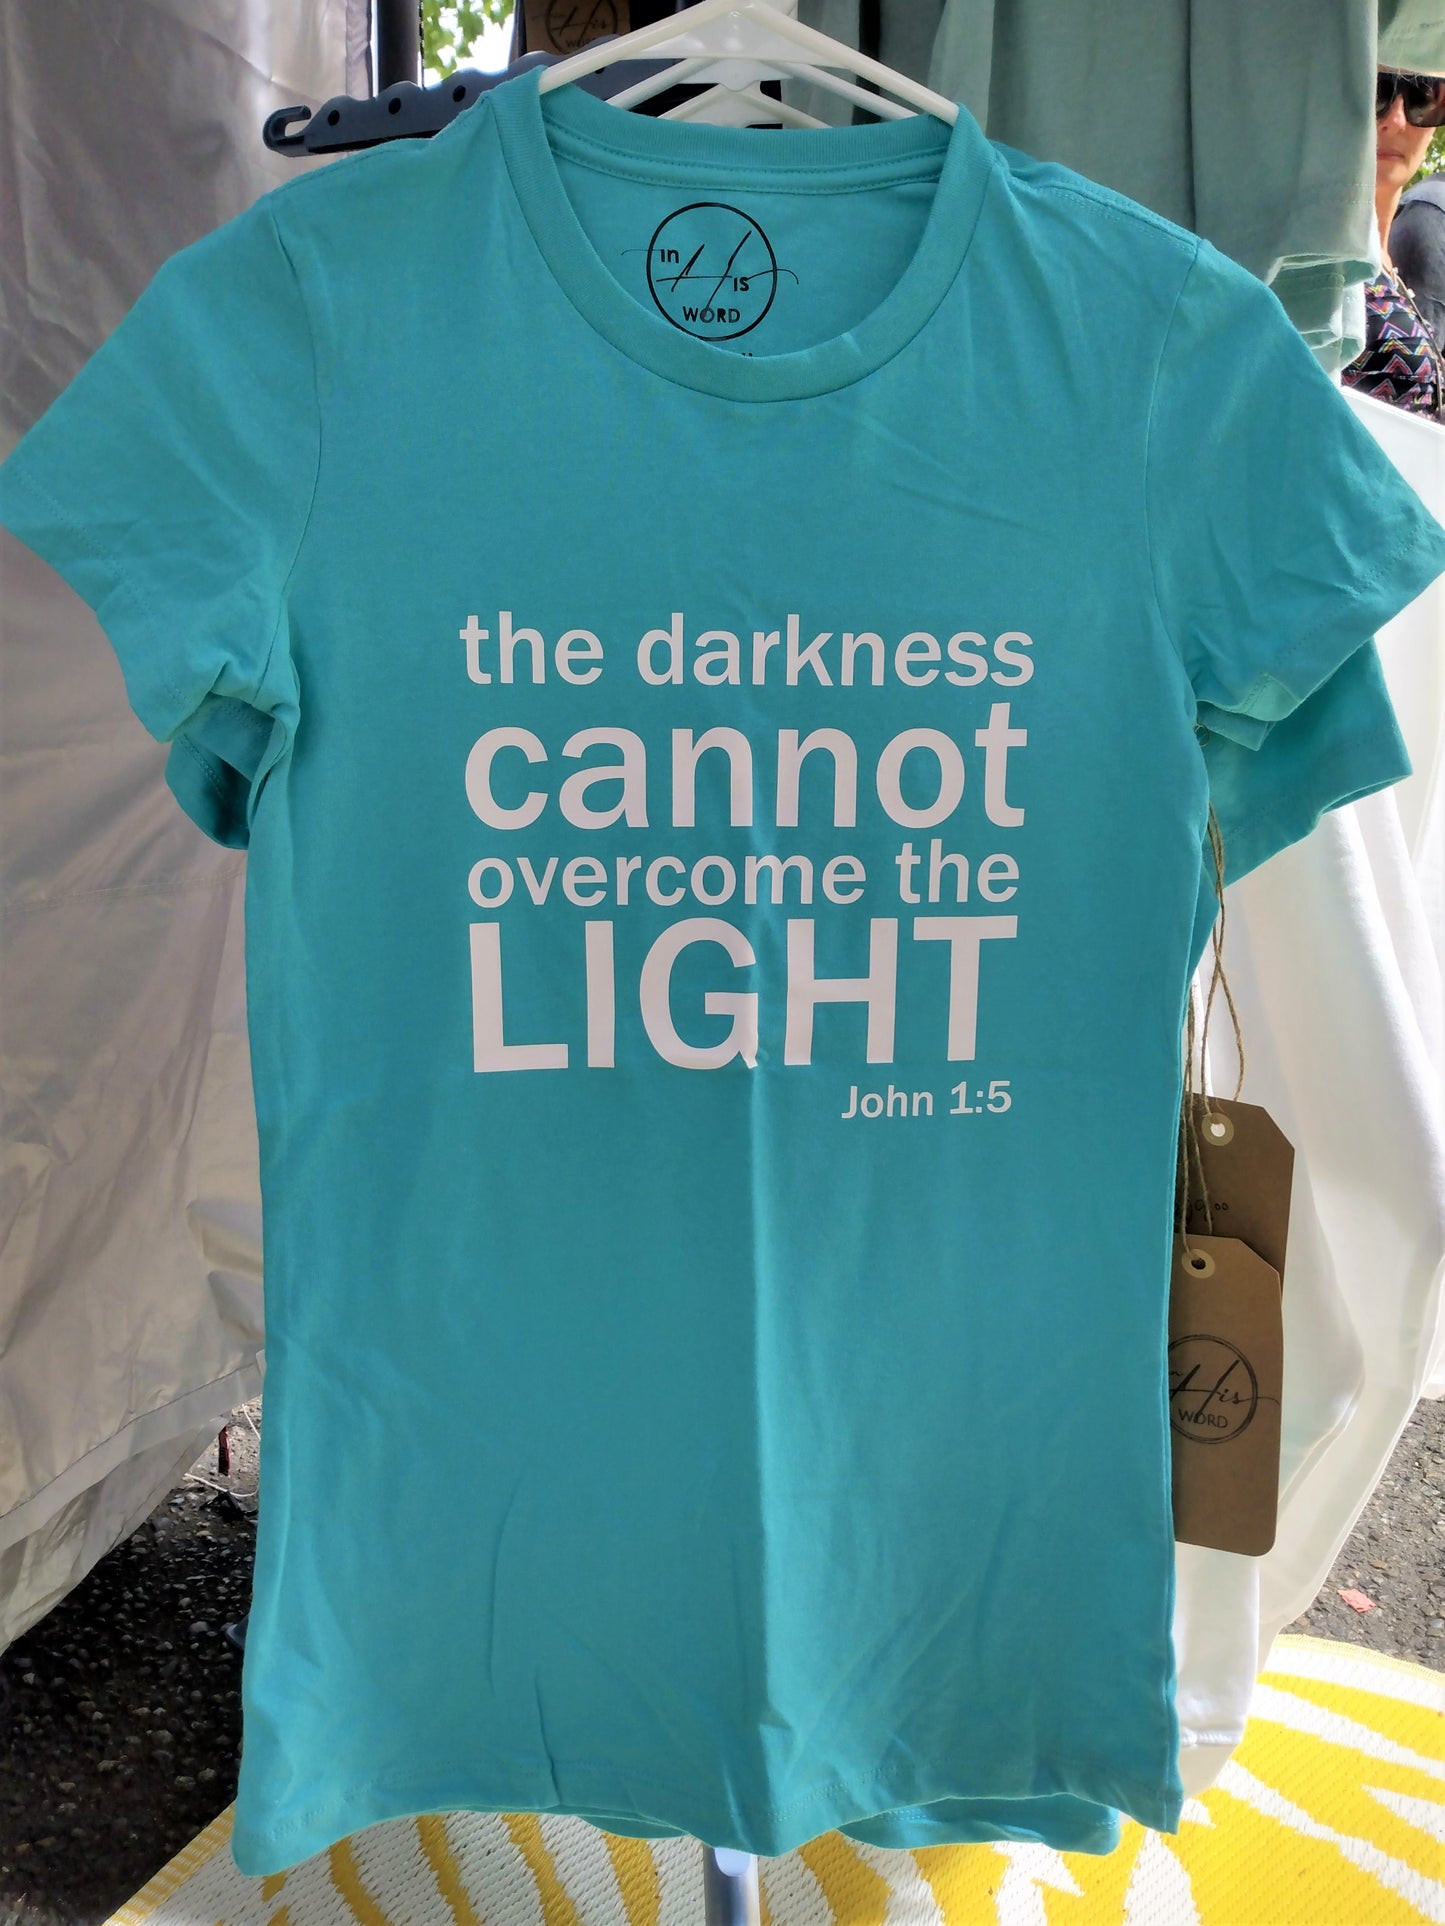 Teal ladies' junior fit t-shirt with white text "the darkness cannot overcome the light. John 1:5" on upper center of shirt.